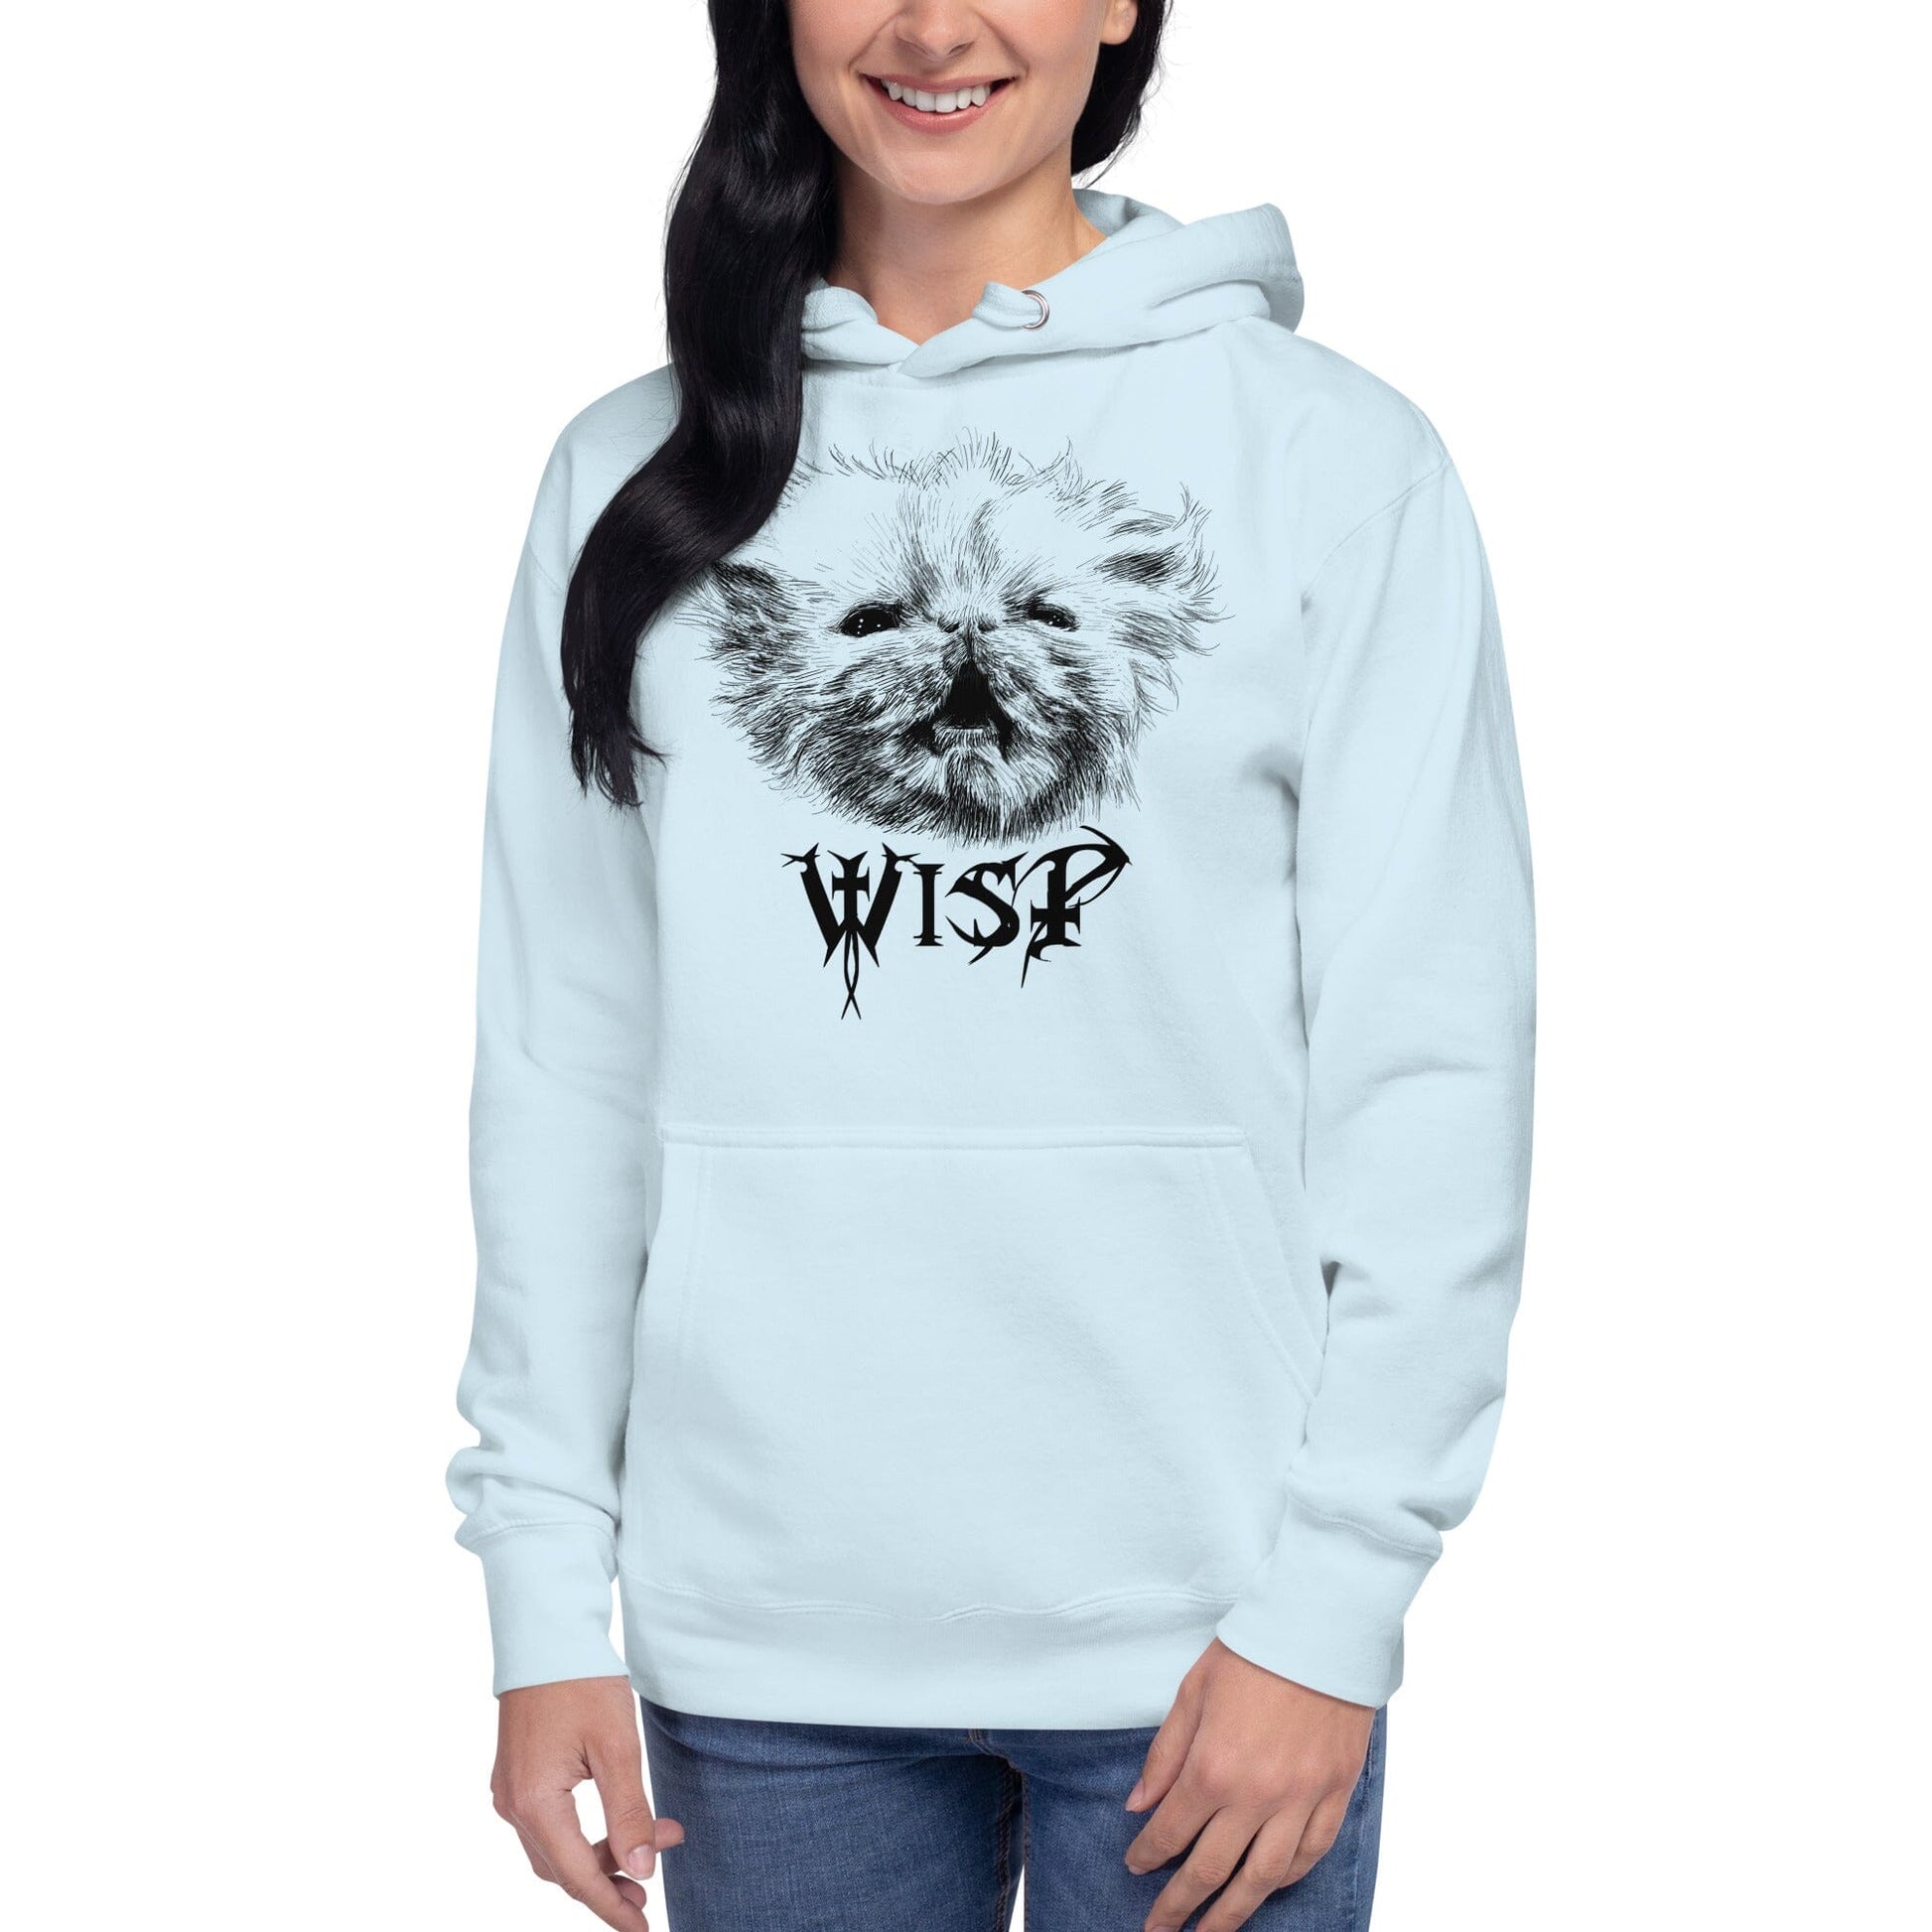 Metal Wisp Hoodie [Unfoiled] (All net proceeds go to Rags to Riches Animal Rescue) JoyousJoyfulJoyness Sky Blue S 